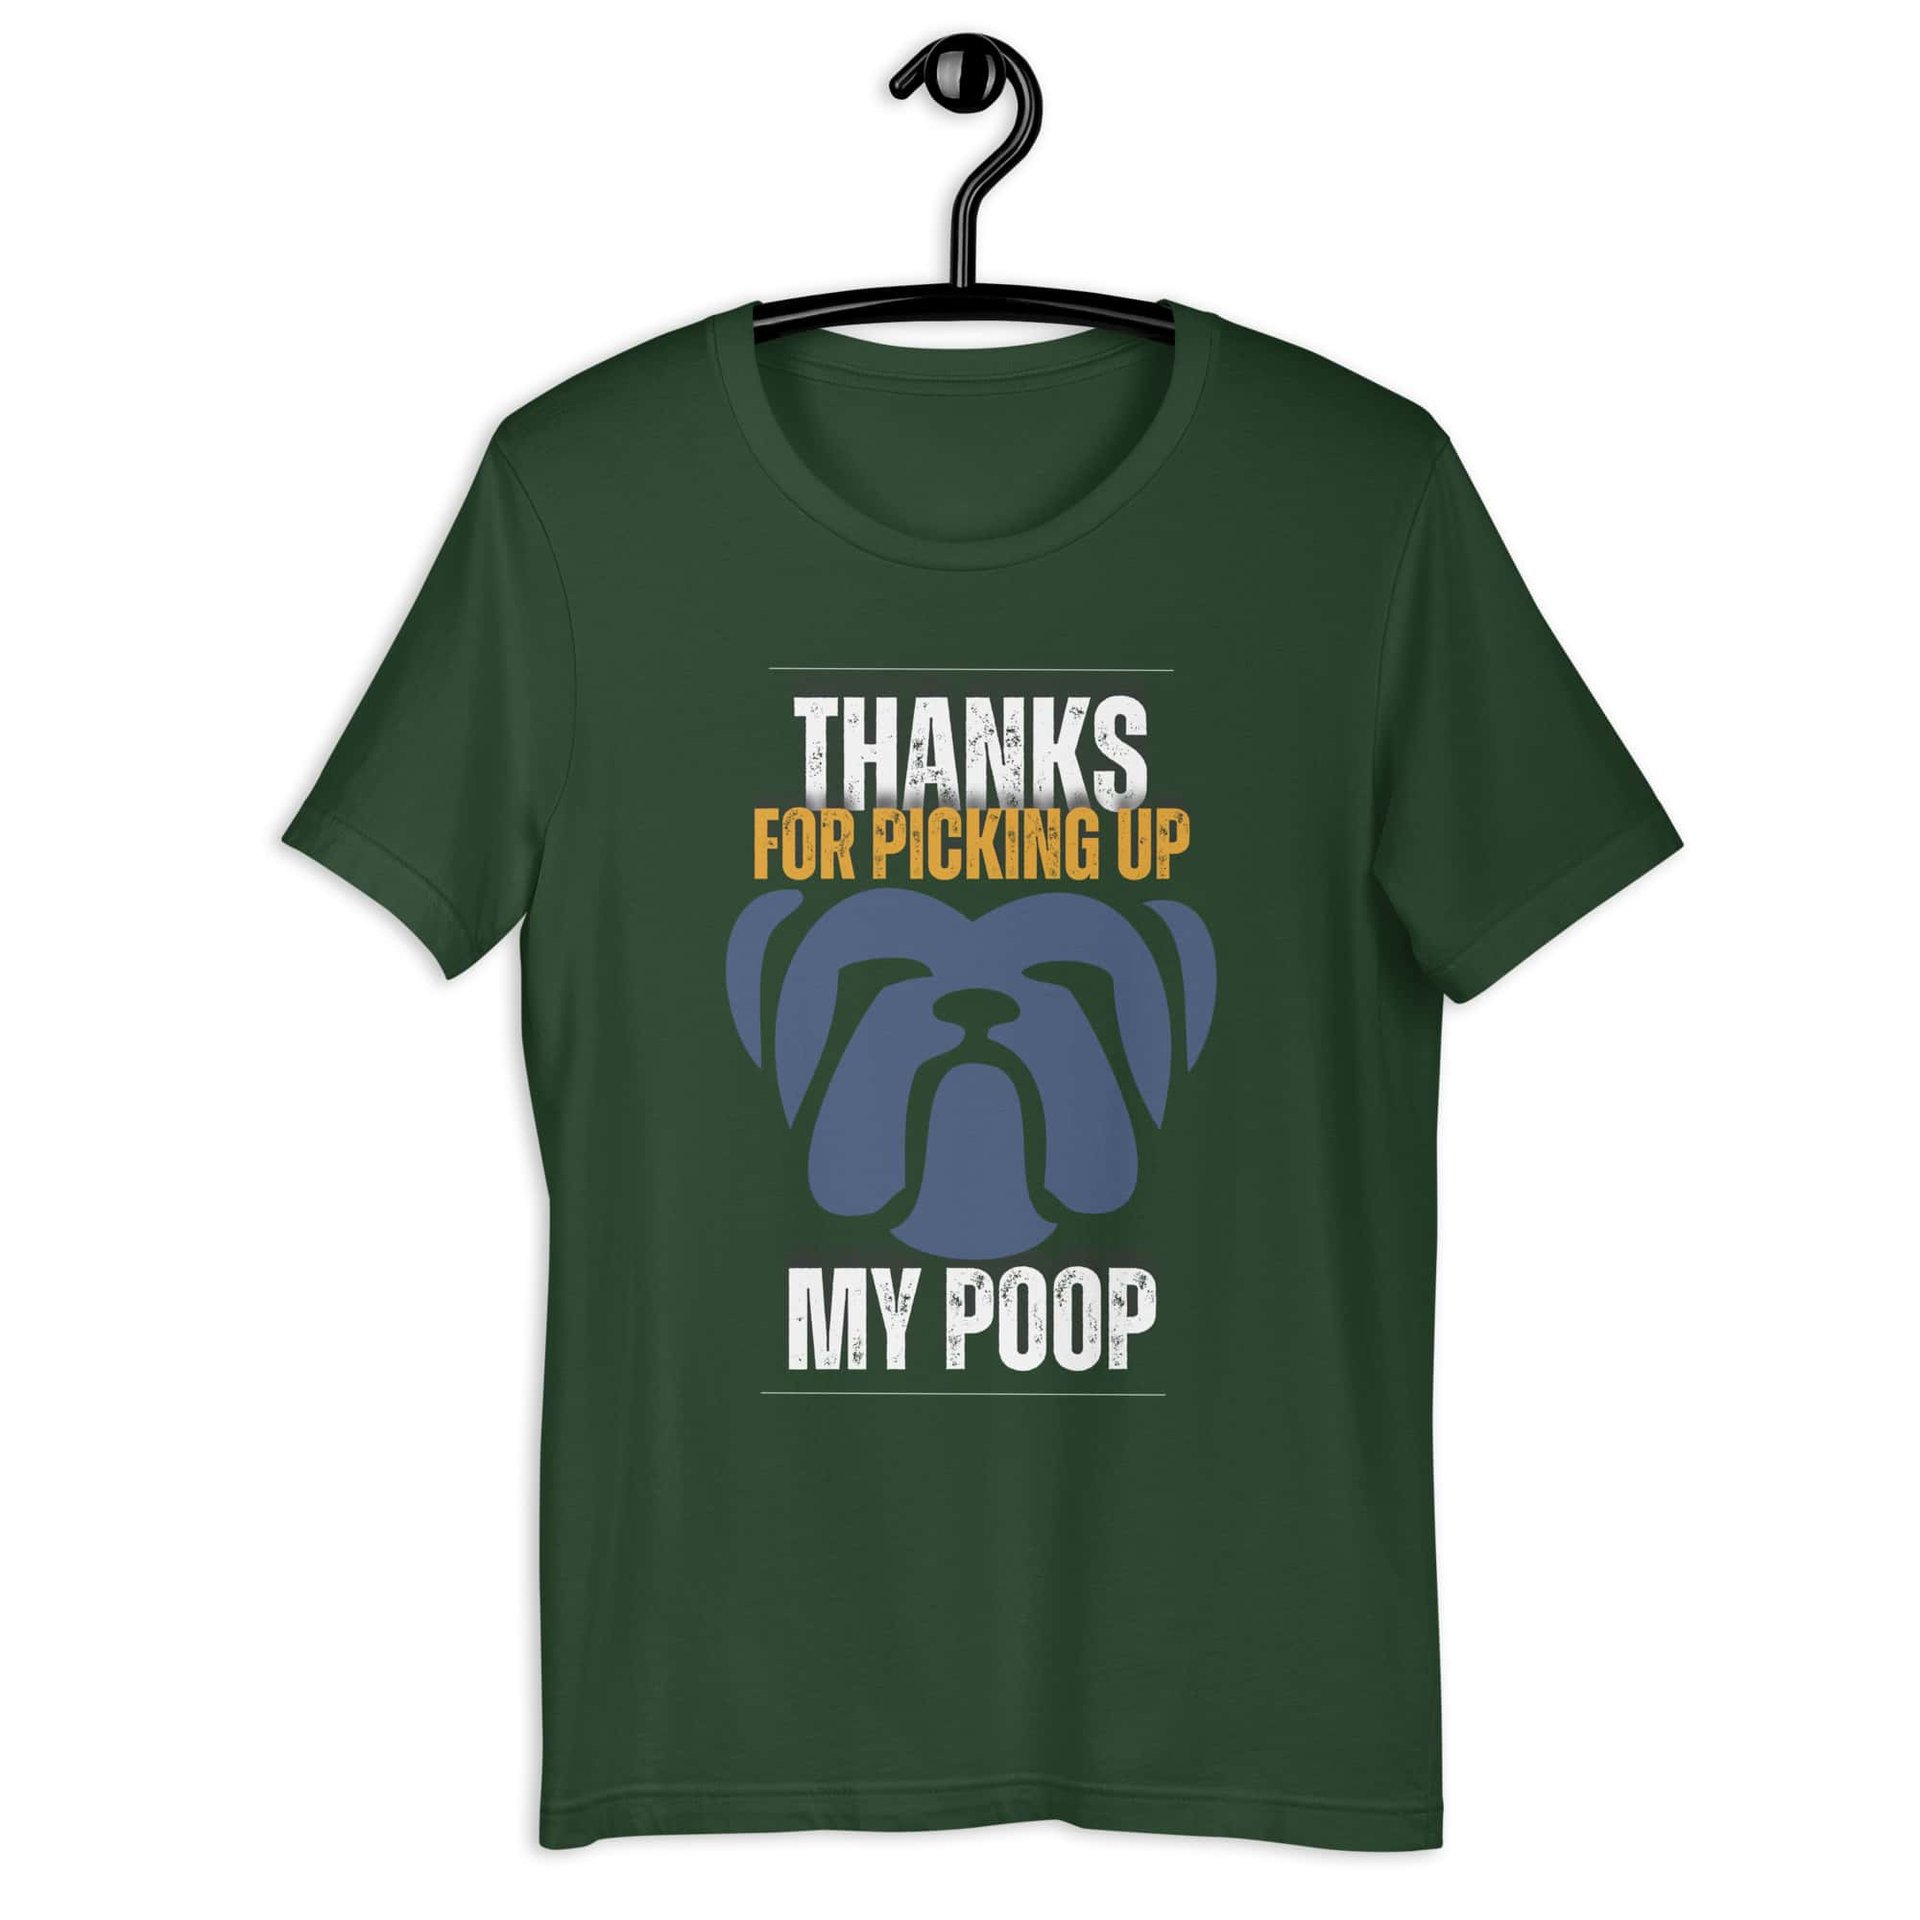 Thanks For Picking Up My POOP Funny Bulldog Unisex T-Shirt. Forest